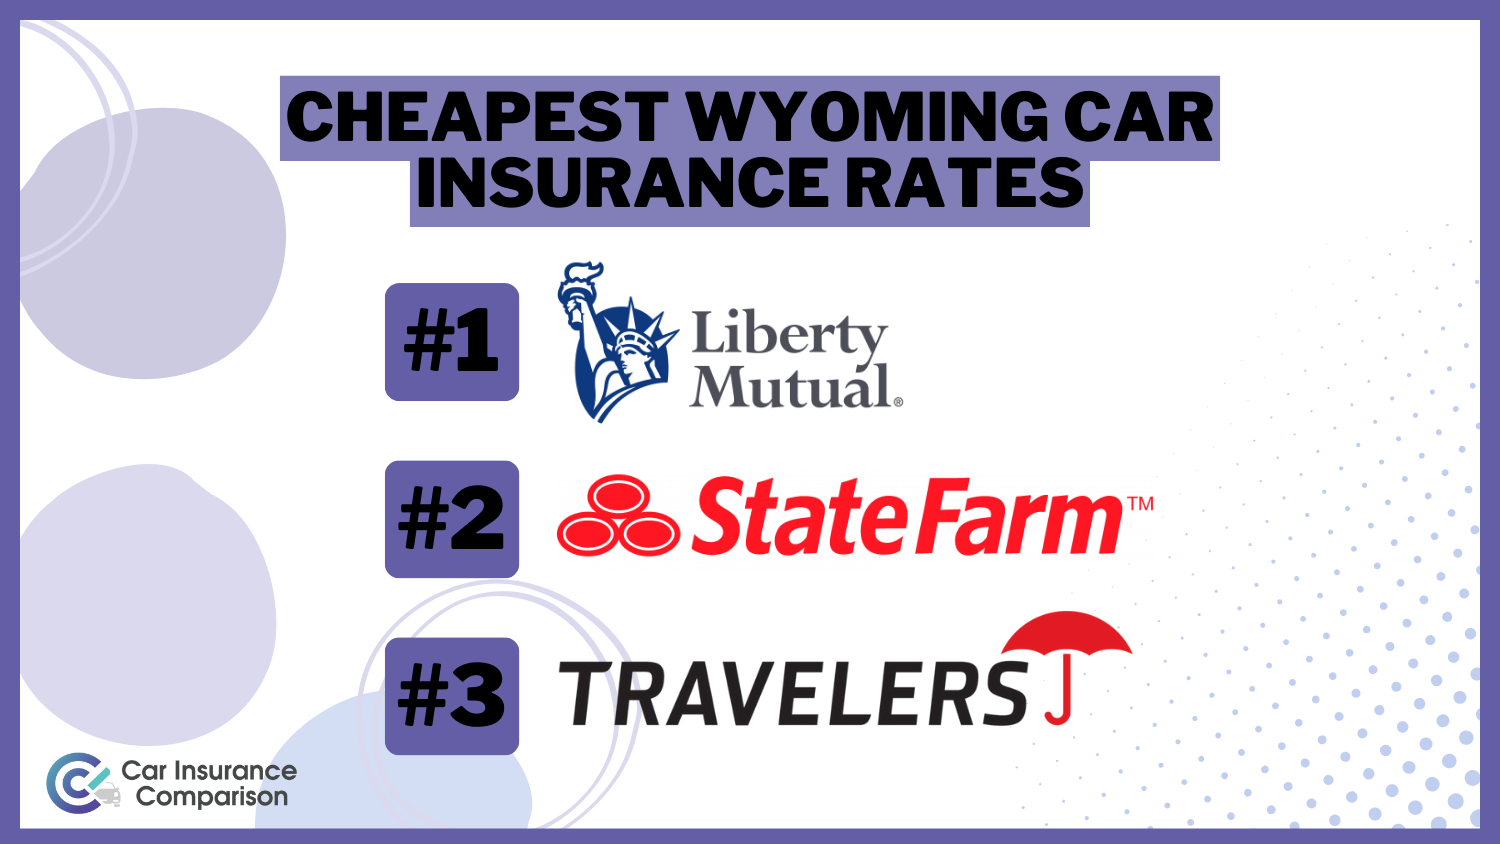 Cheapest Wyoming Car Insurance Rates: Liberty Mutual, State Farm, Travelers